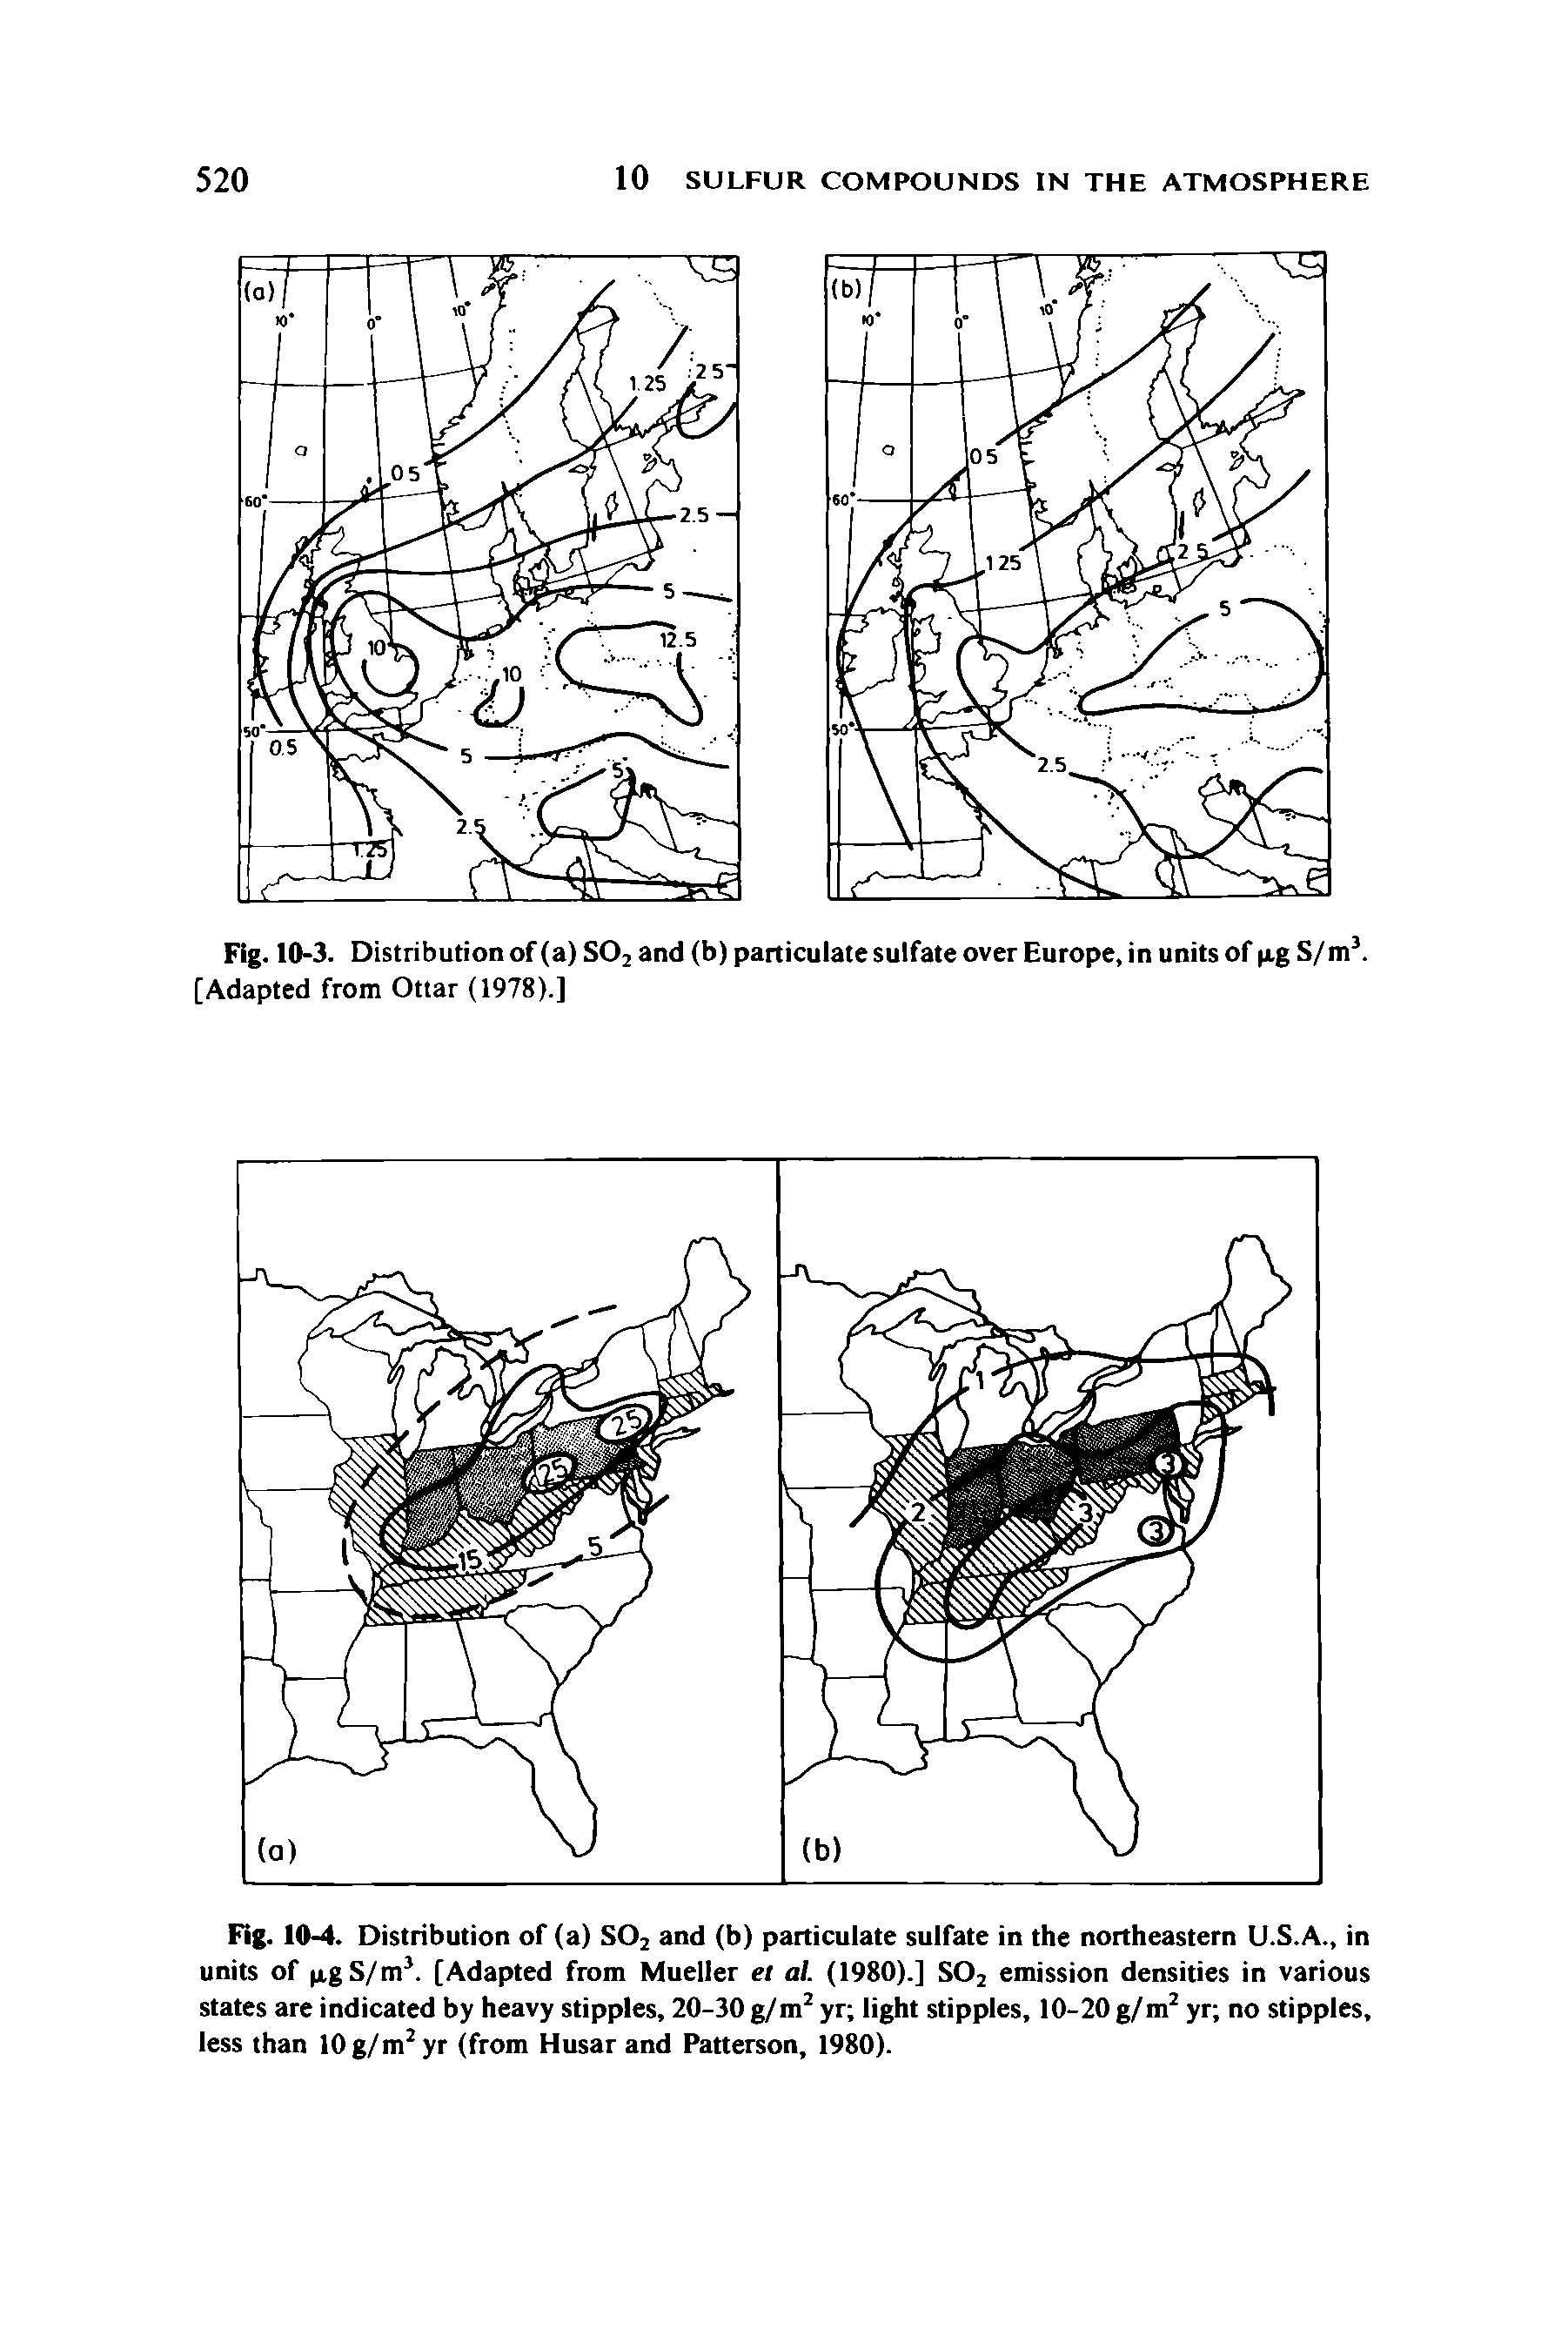 Fig. 10-3. Distribution of (a) SO, and (b) particulate sulfate over Europe, in units of pg S/m [Adapted from Ottar (1978).]...